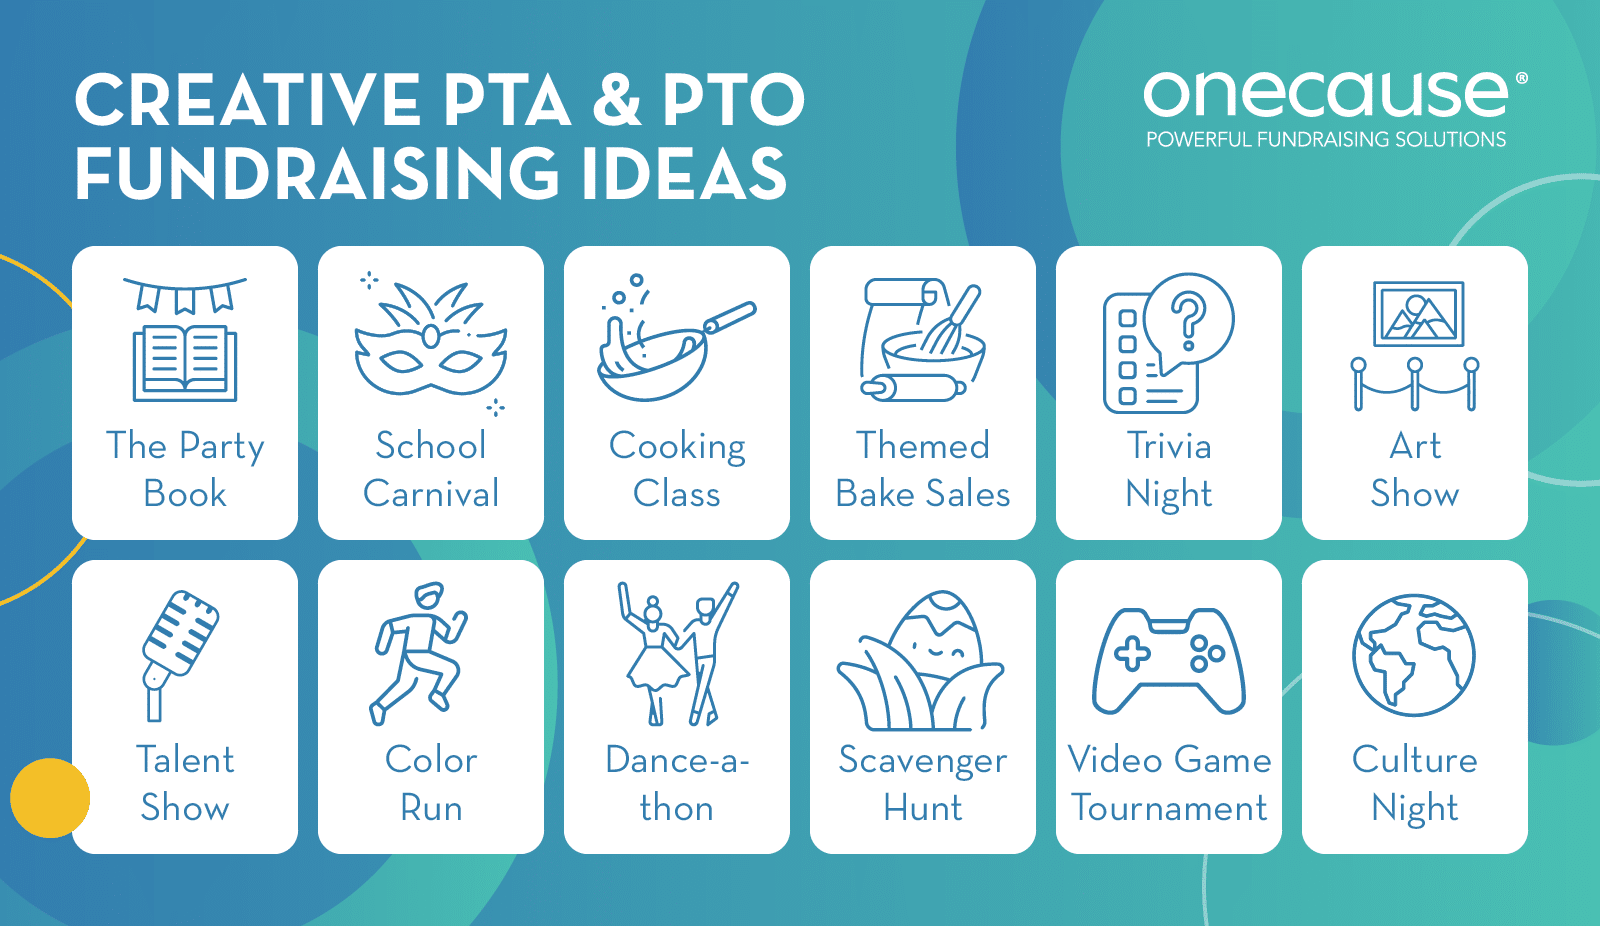 A list of creative PTO and PTA fundraising ideas, also described in the text below.